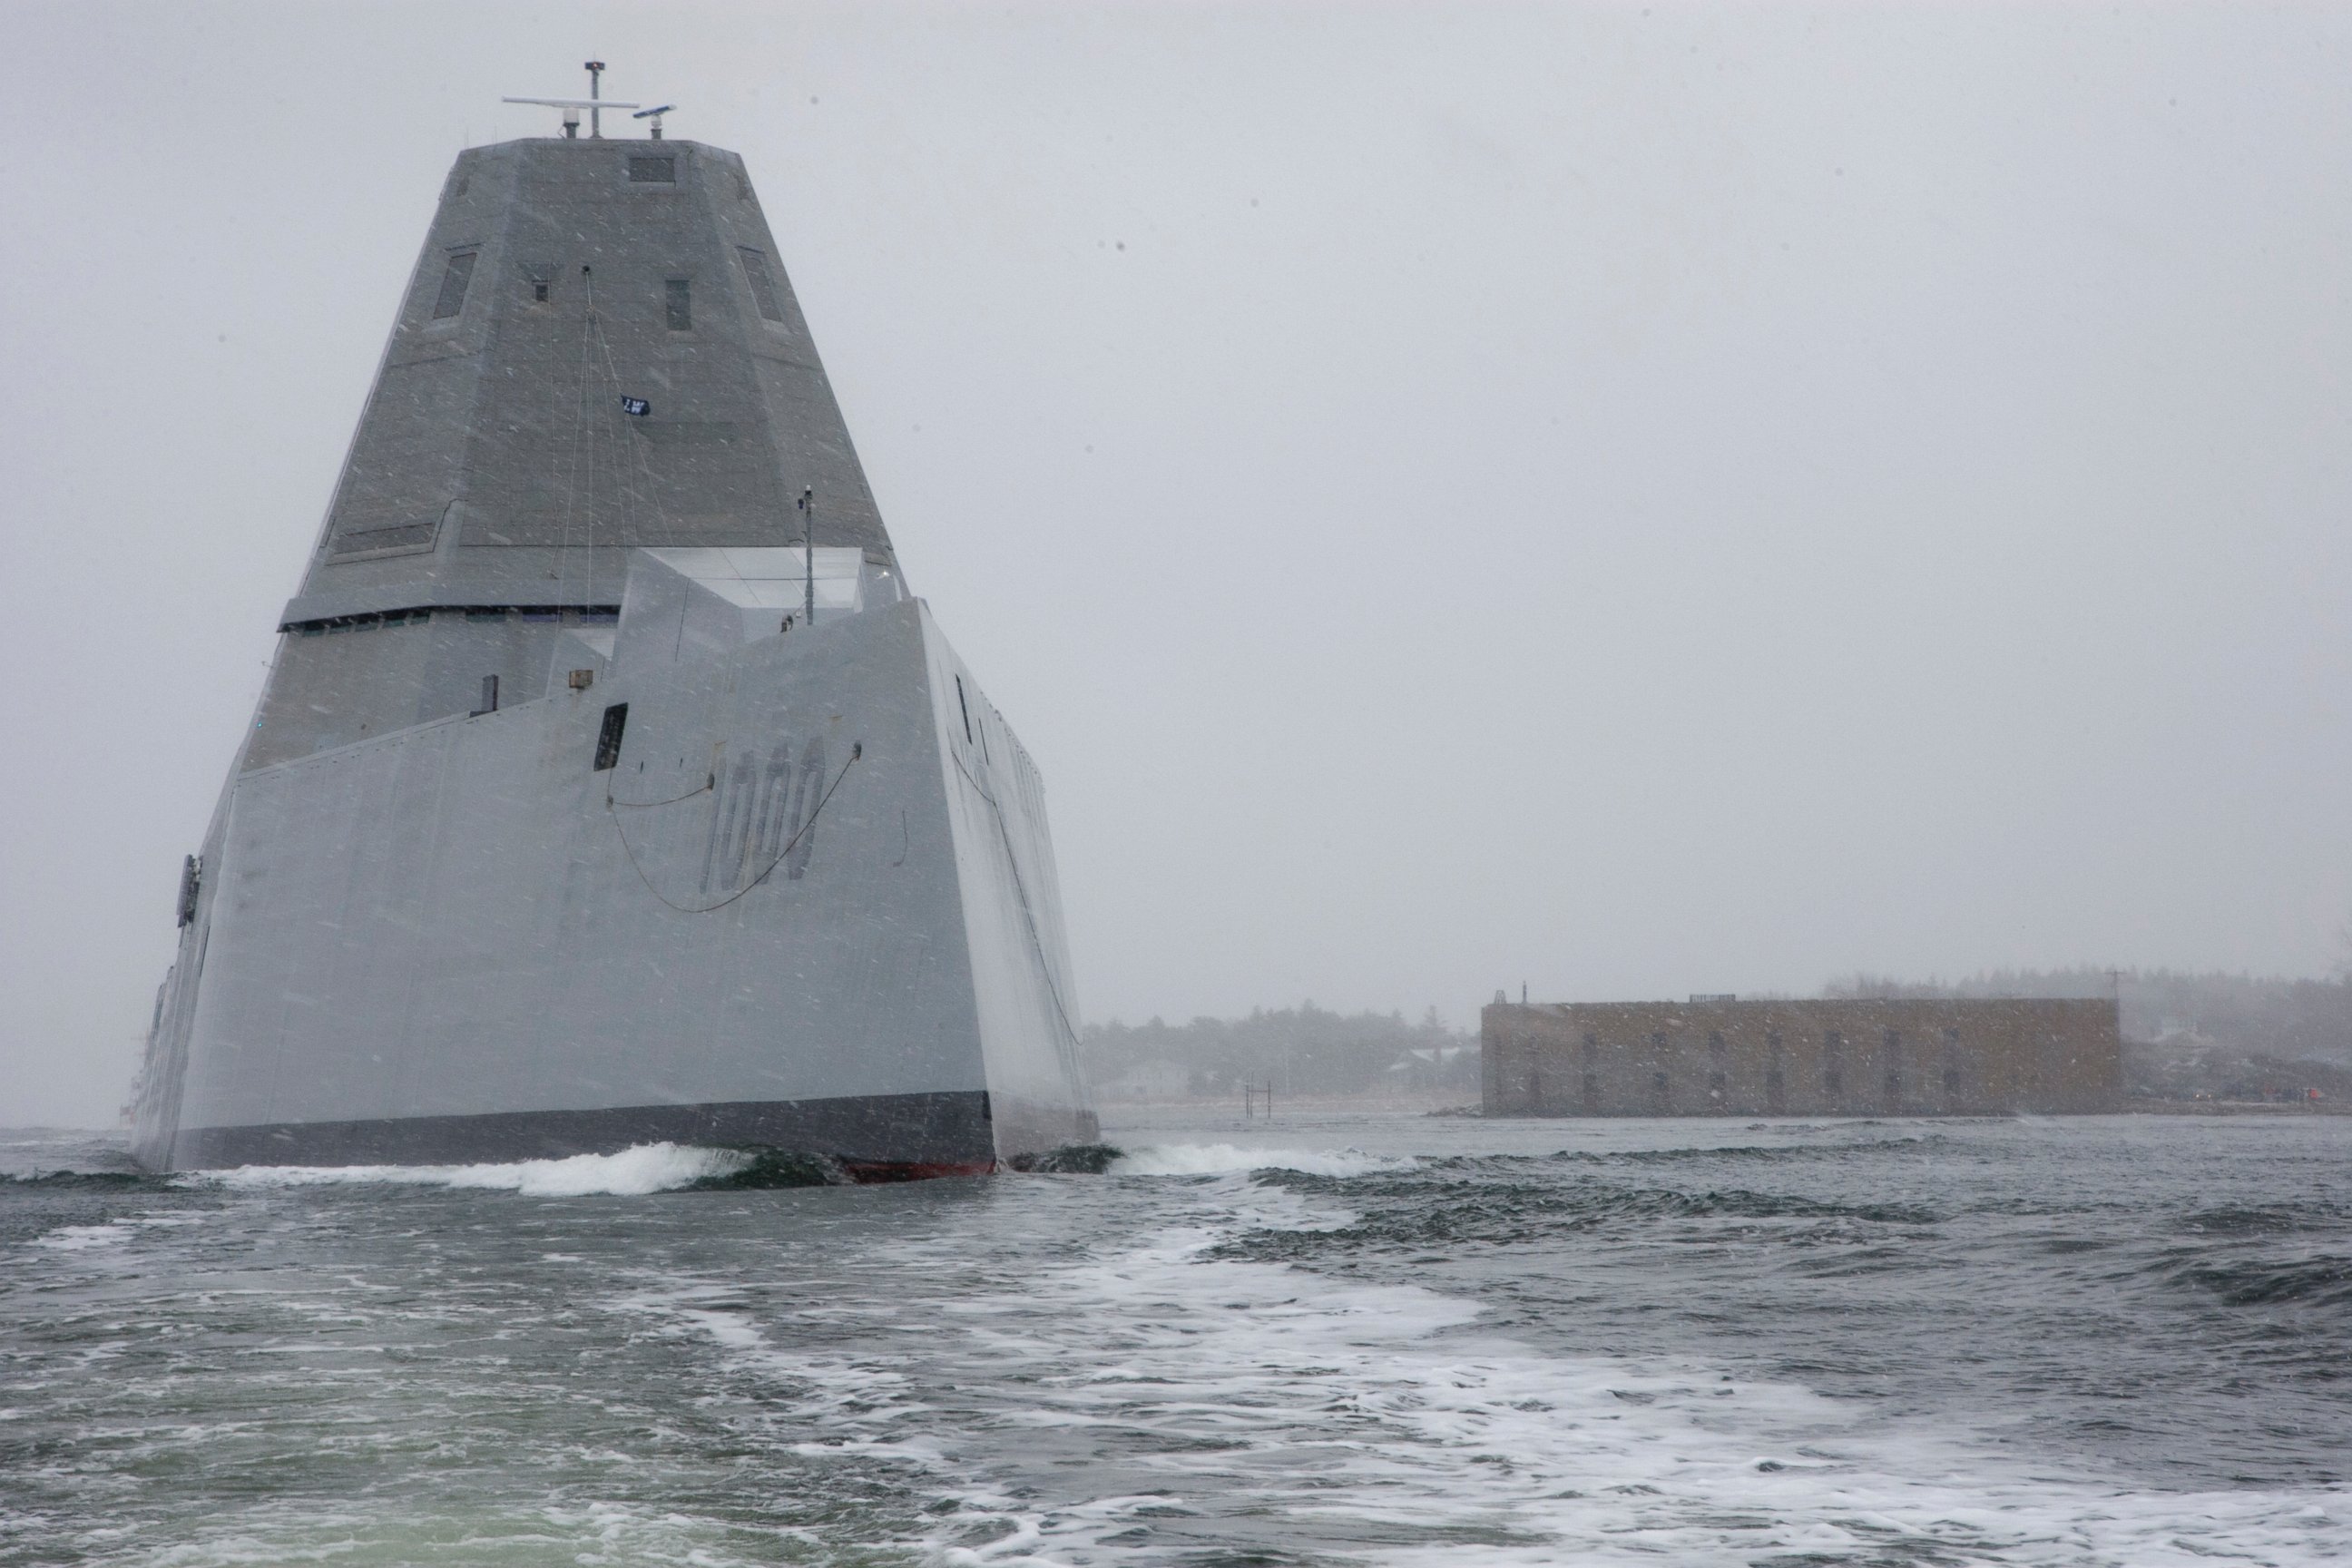 PHOTO: The future guided-missile destroyer USS Zumwalt (DDG 1000) departs the Bath Iron Works shipyard for its second at-sea period to conduct builder's trials, March 24, 2016.